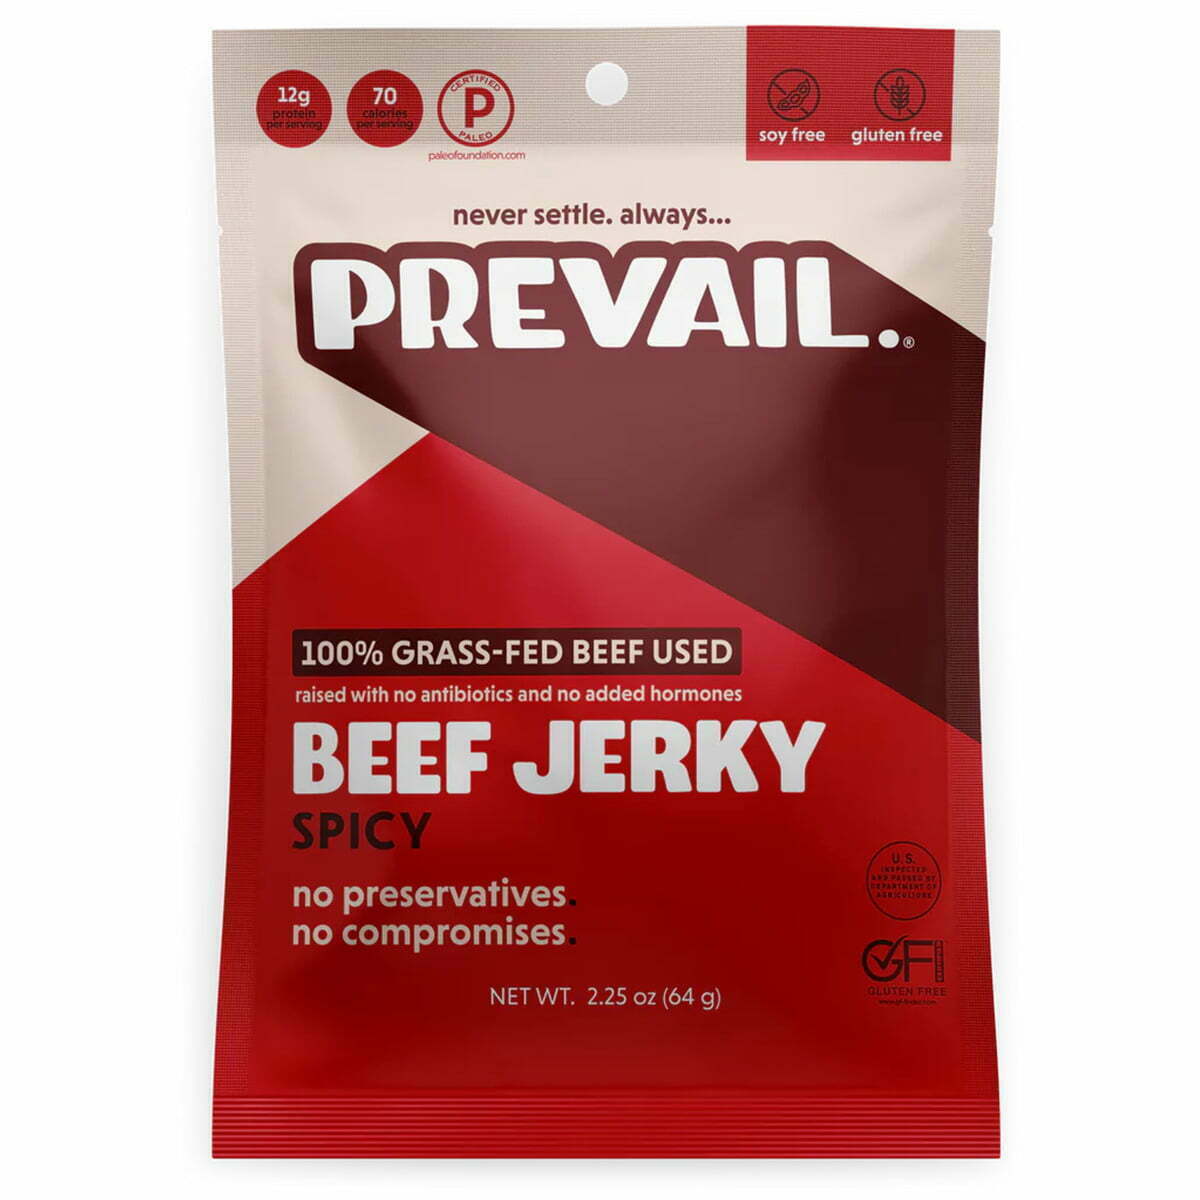 Prevail Beef Jerky Packaging